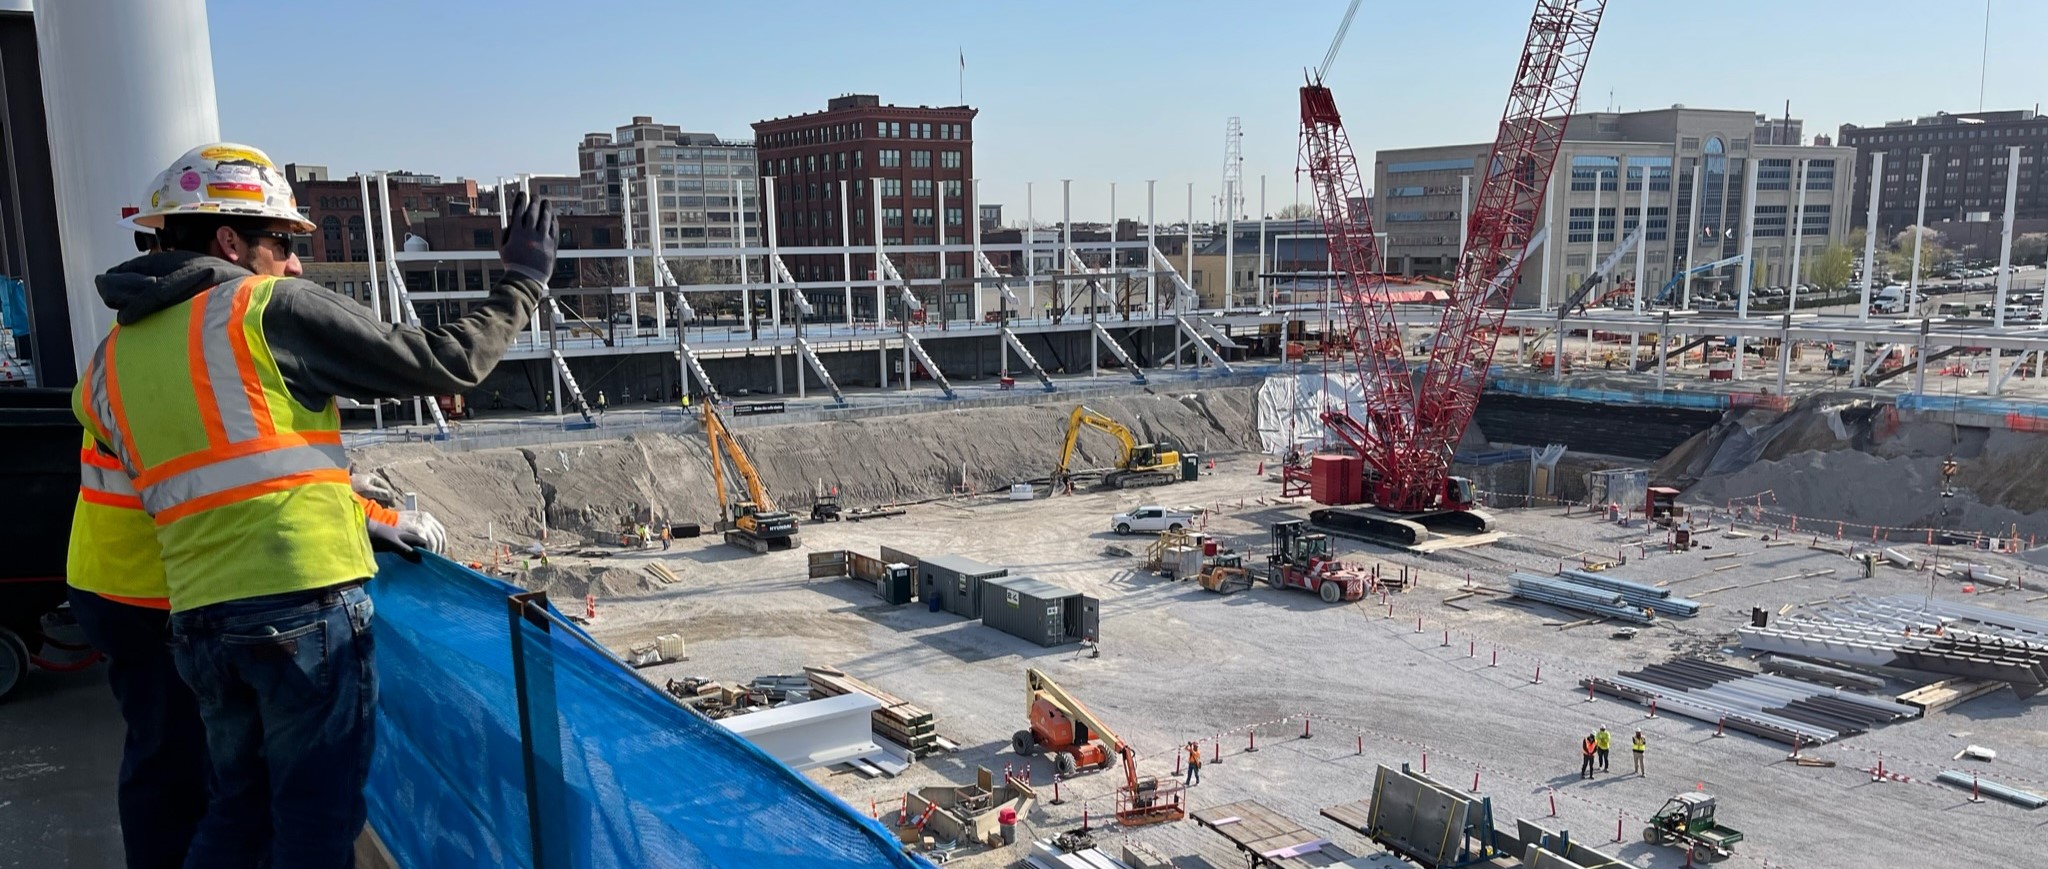 Photo of an ongoing construction site during the daytime.